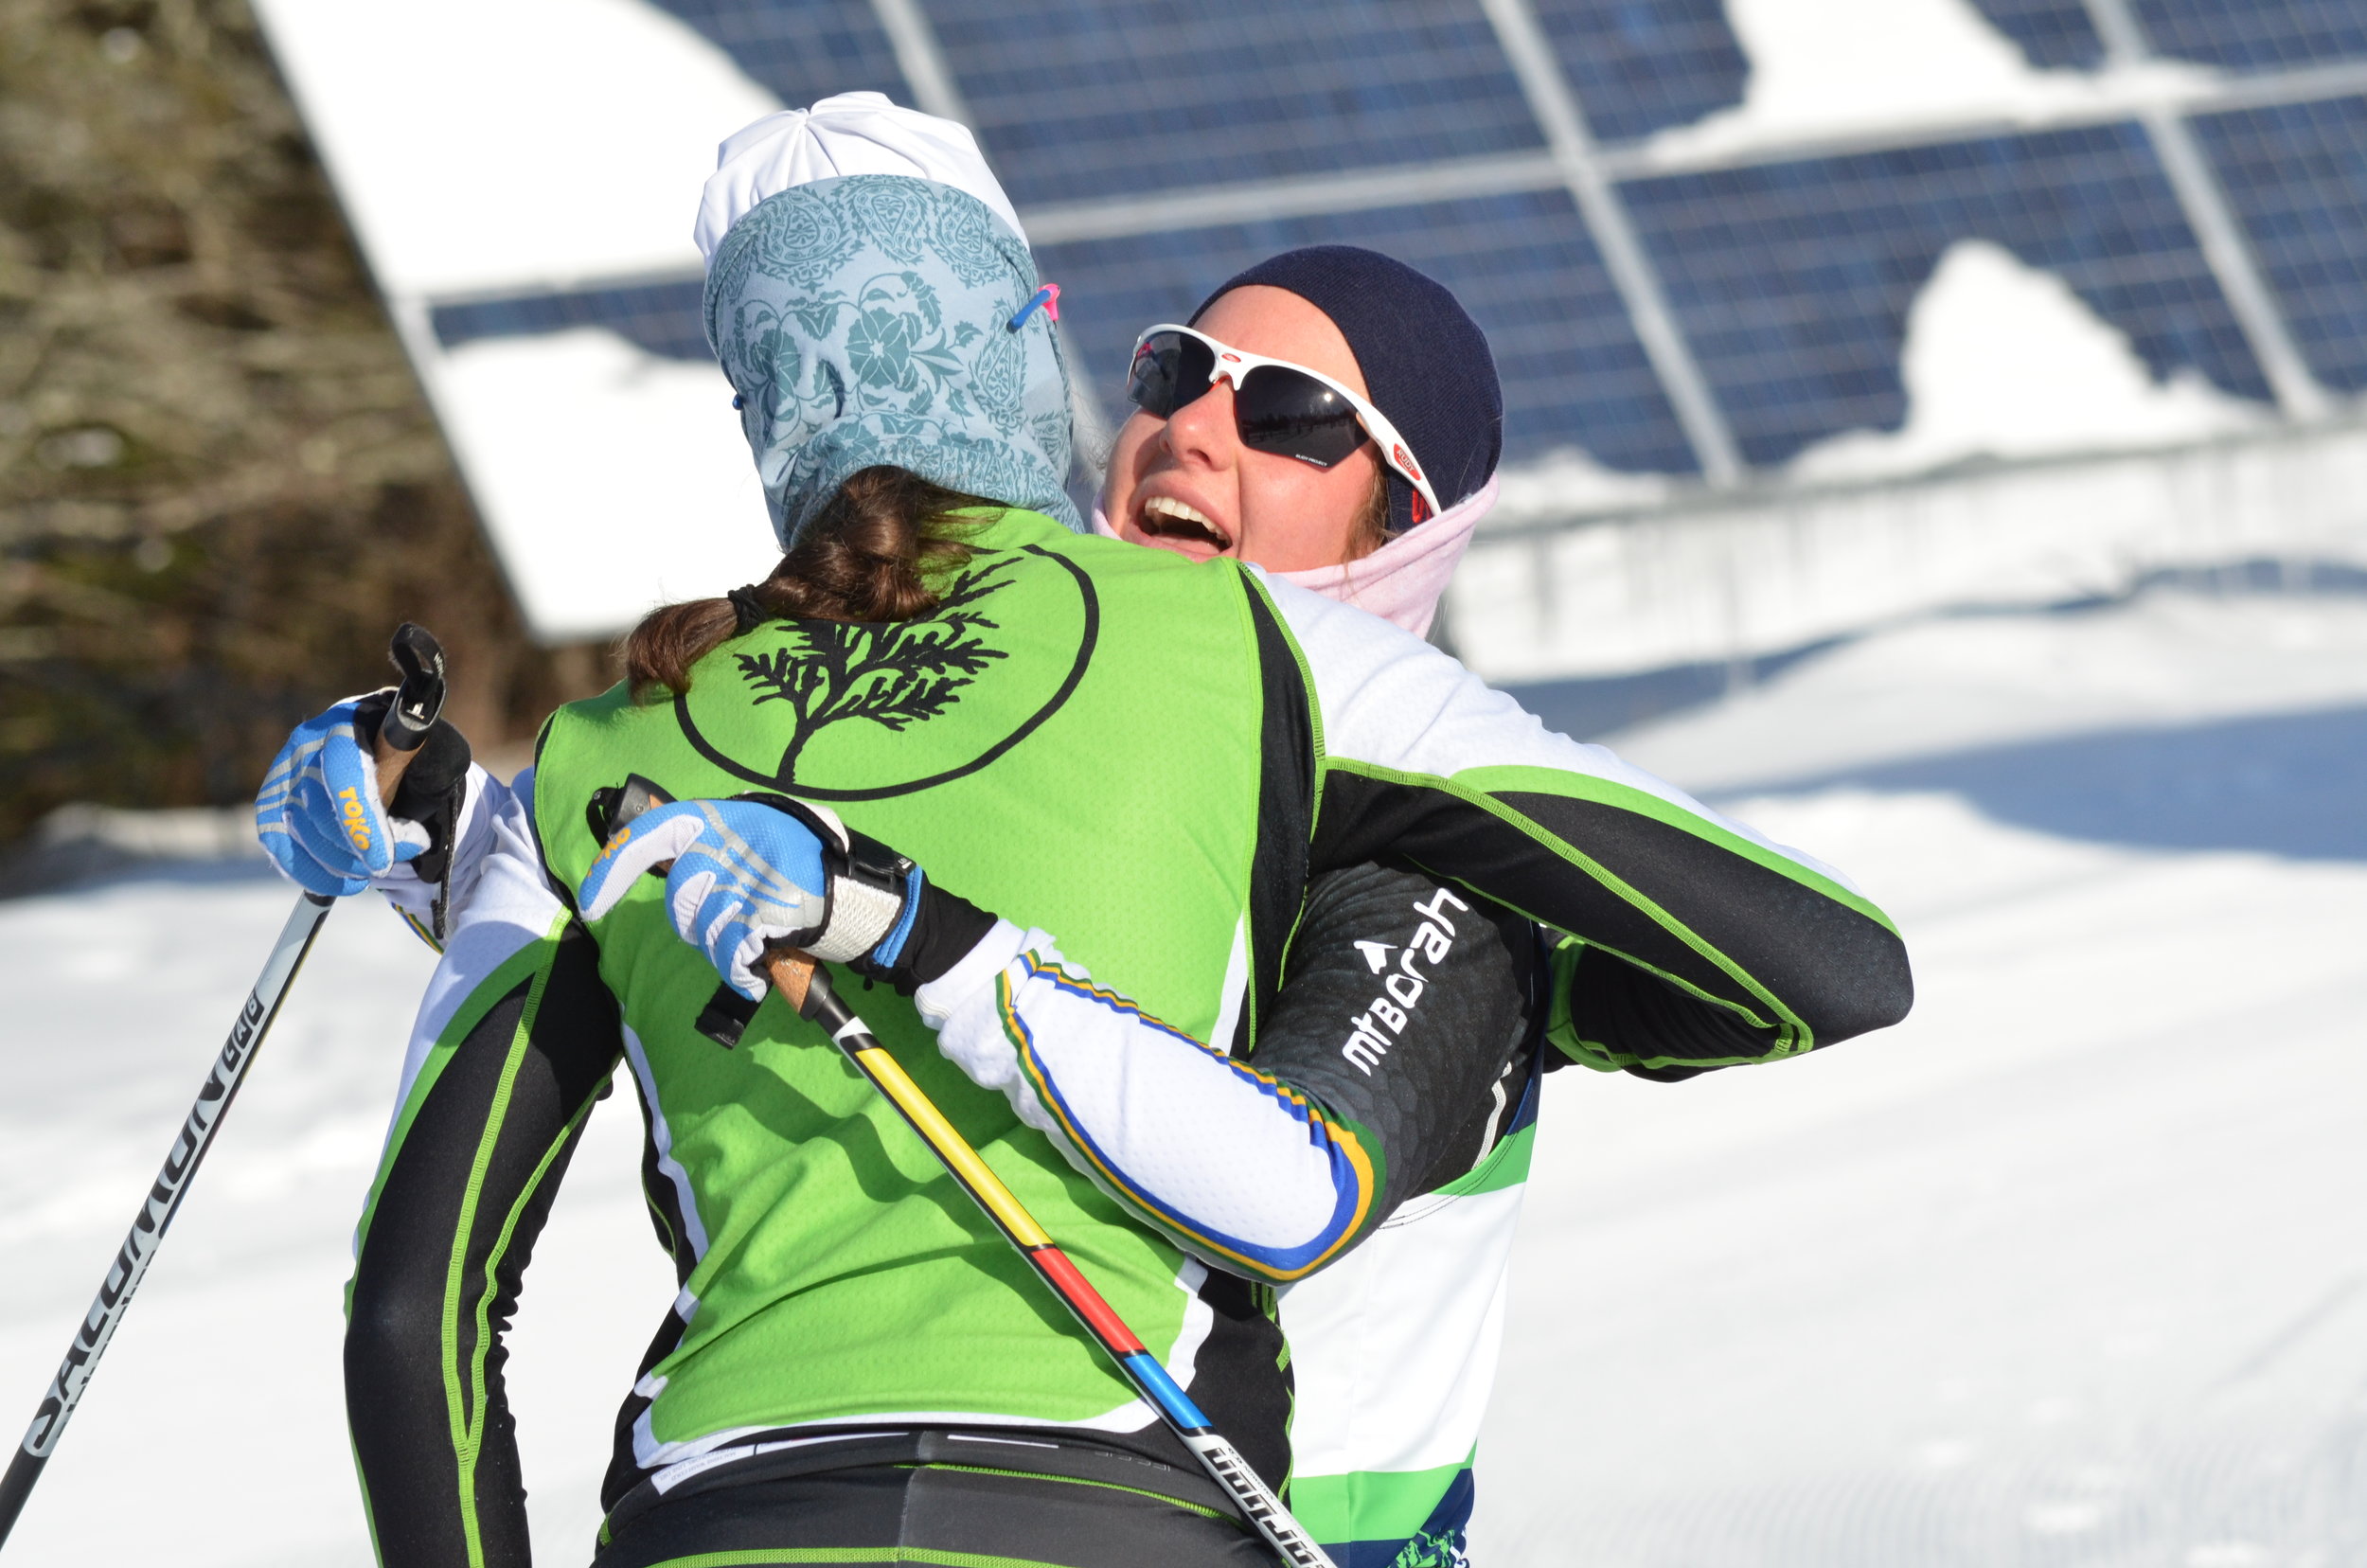 Anja Gruber (Far West) gets a hug at the finish line